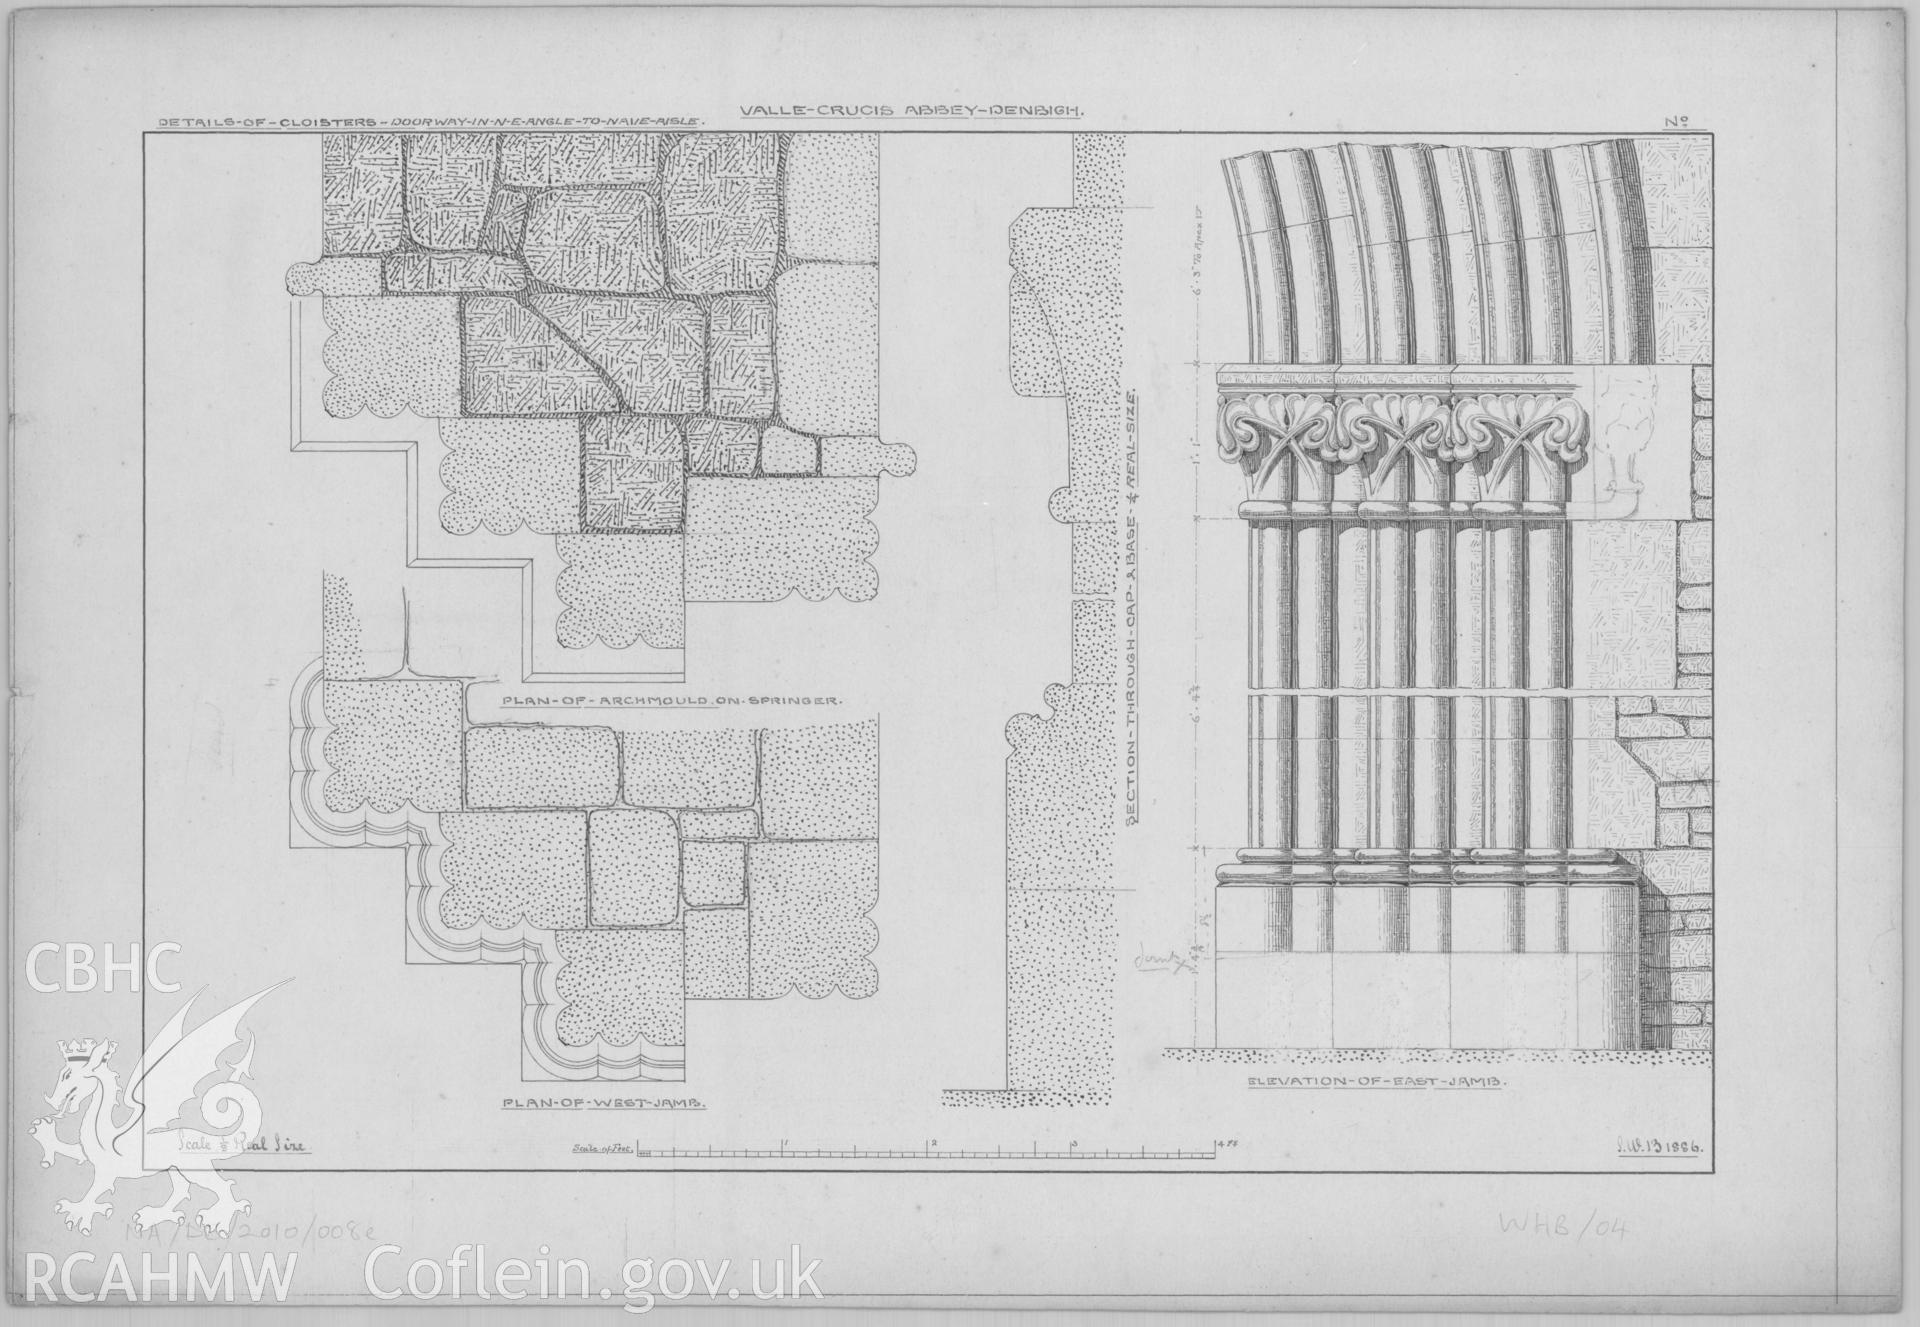 Original architectural drawing in pencil and ink showing details of the Cloisters at Valle Crucis Abbey, including plan of west jamb and elevation of east jamb. Produced by Hayward Brakspear and Sons in 1886.